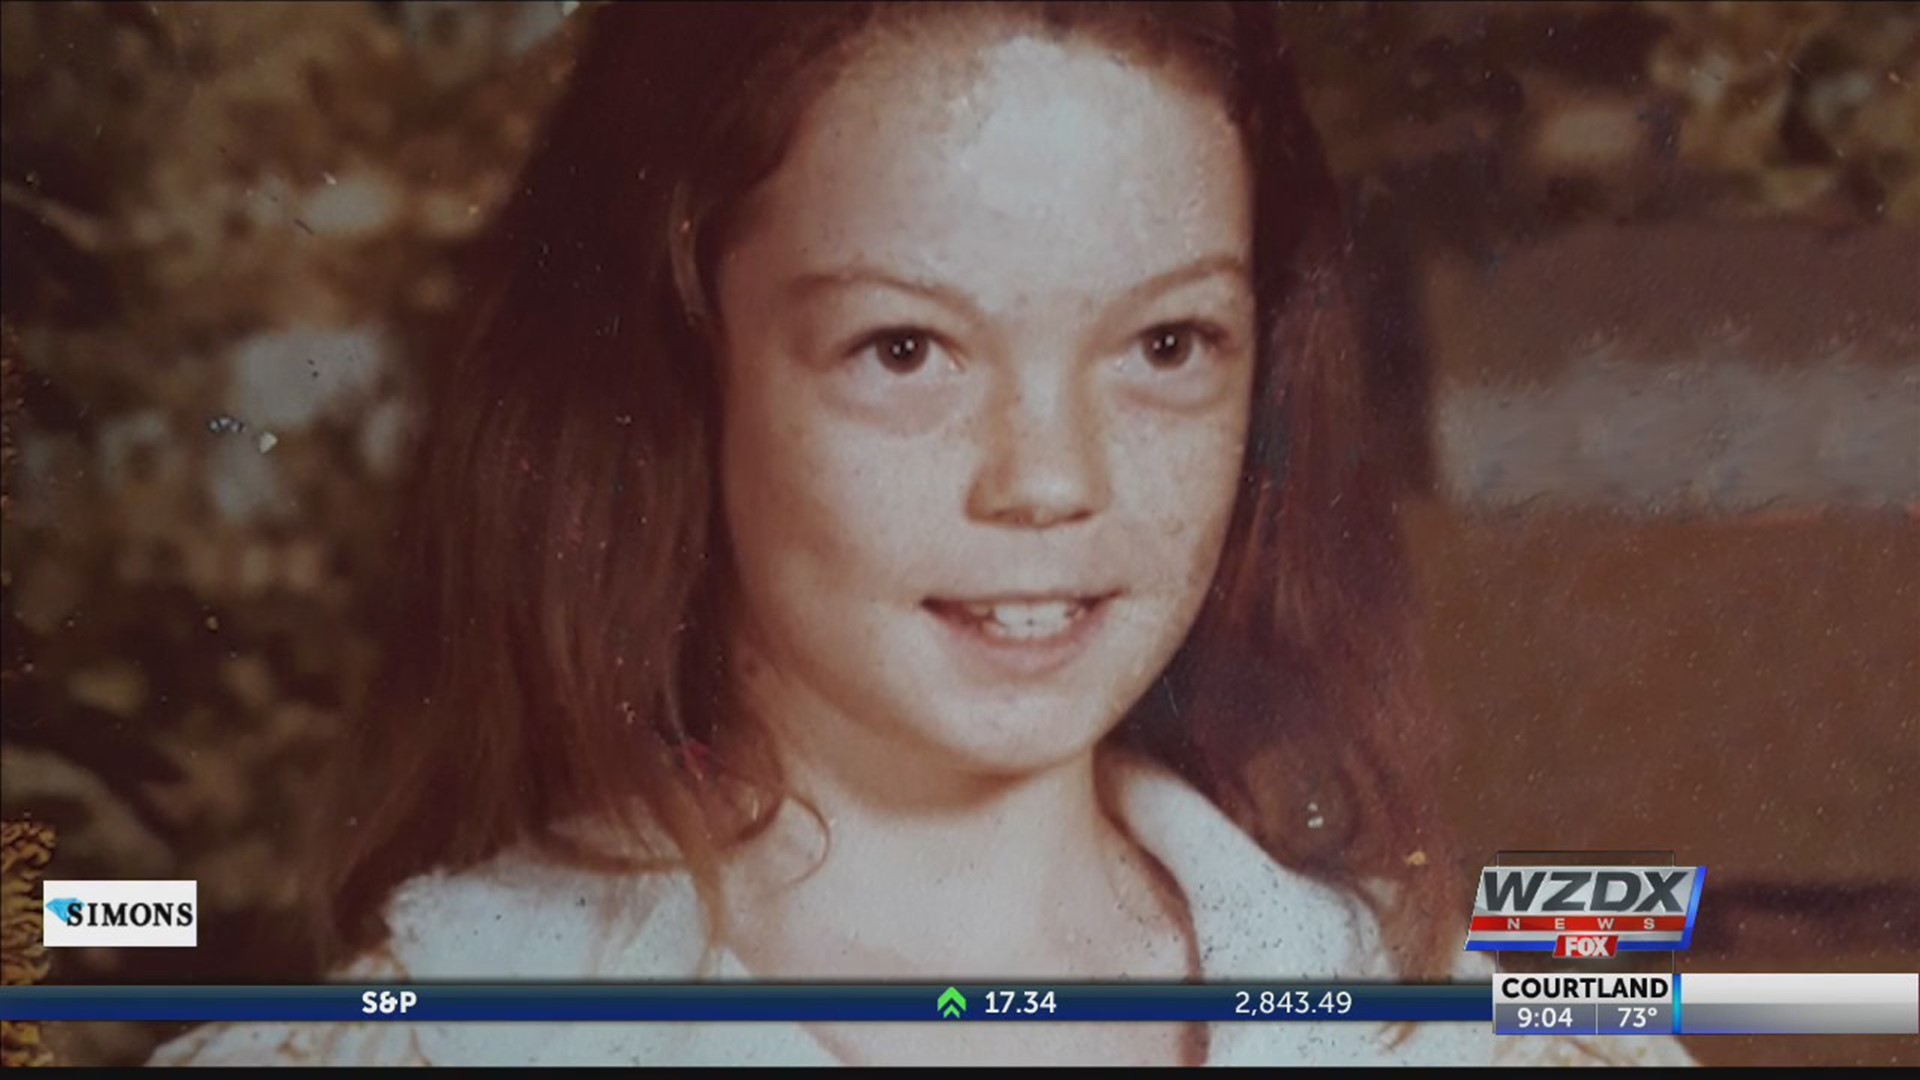 On the last day of the Alabama legislative session, a bill passed in honor of a young girl brutally murdered in the Tennessee Valley over 35 years ago.